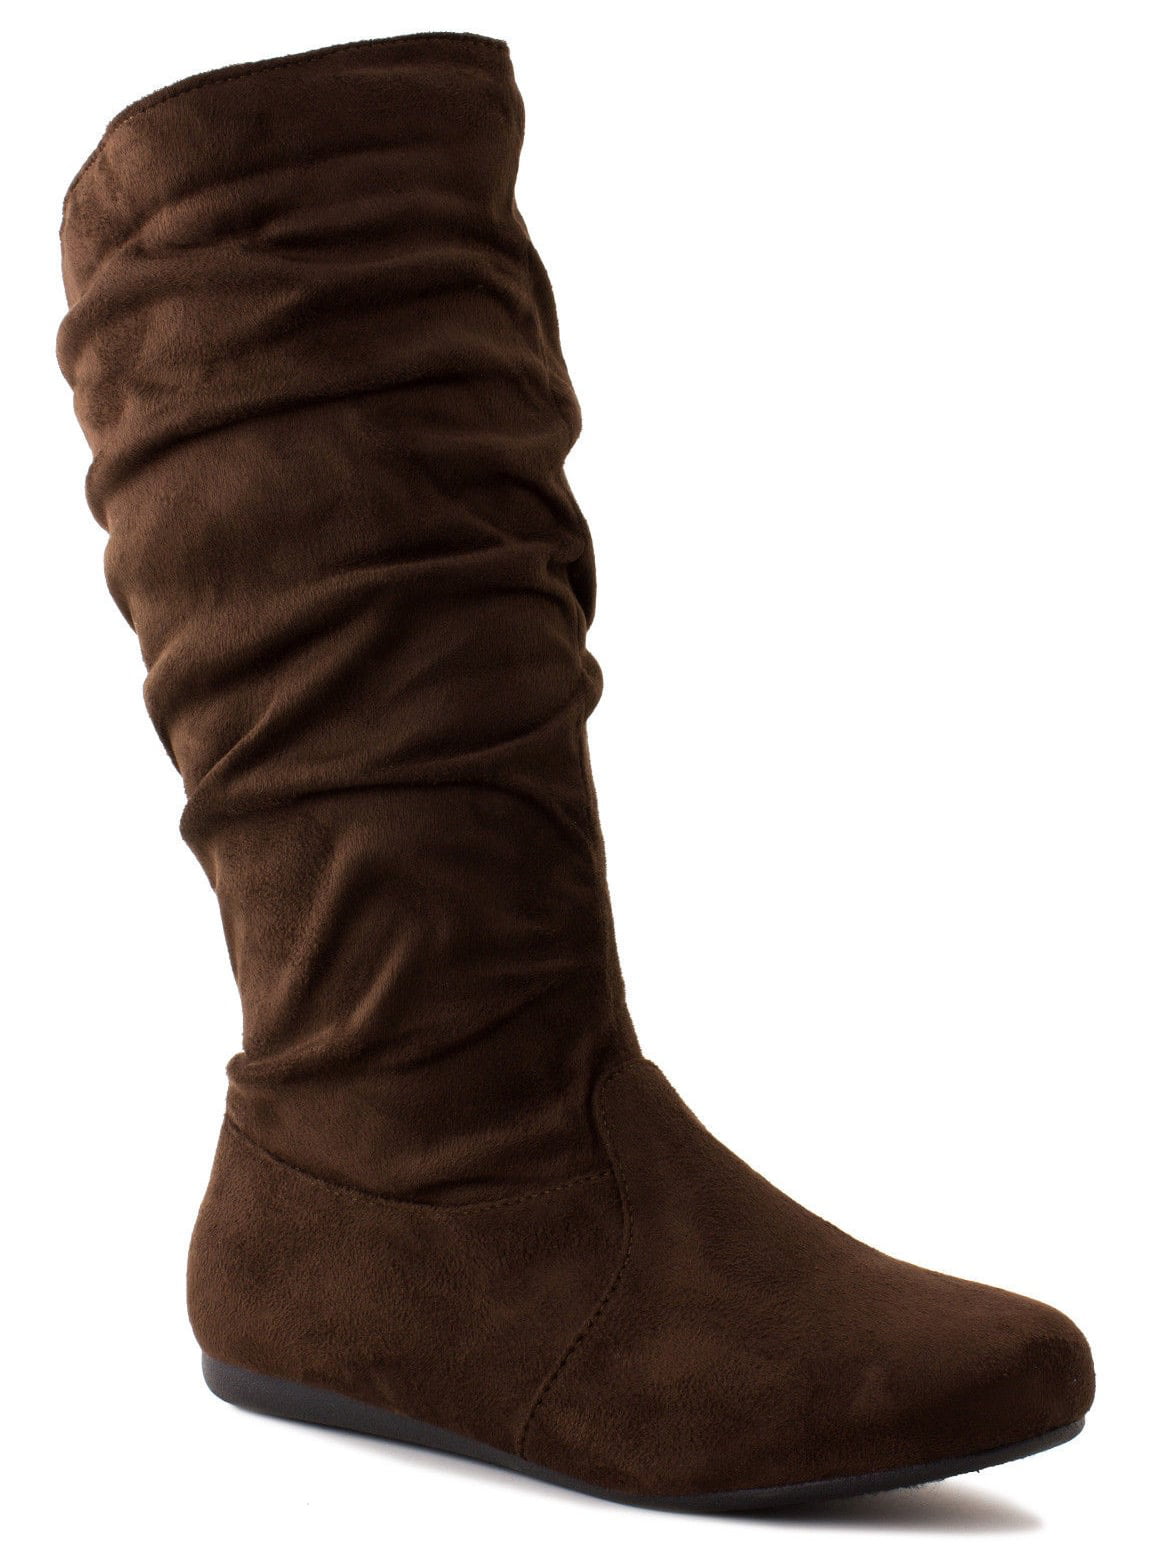 tall suede winter boots